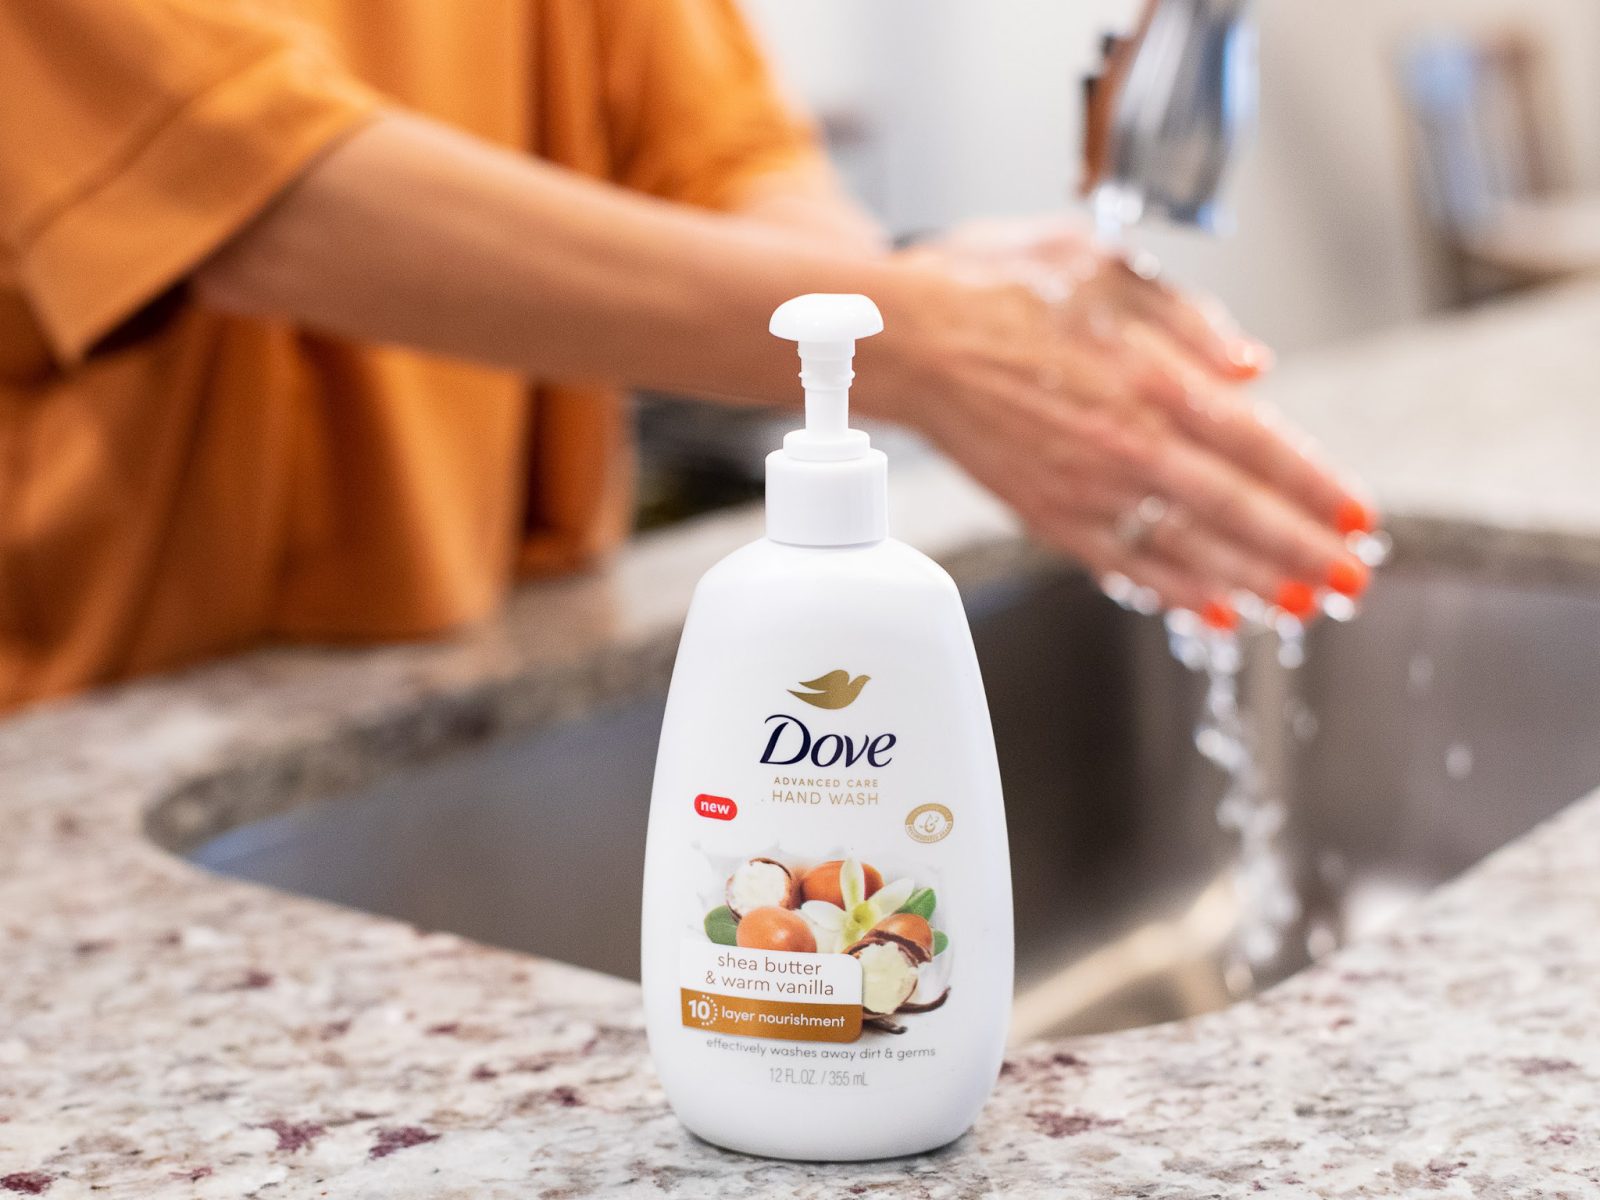 Get Dove Hand Wash For As Low As $2.59 At Kroger